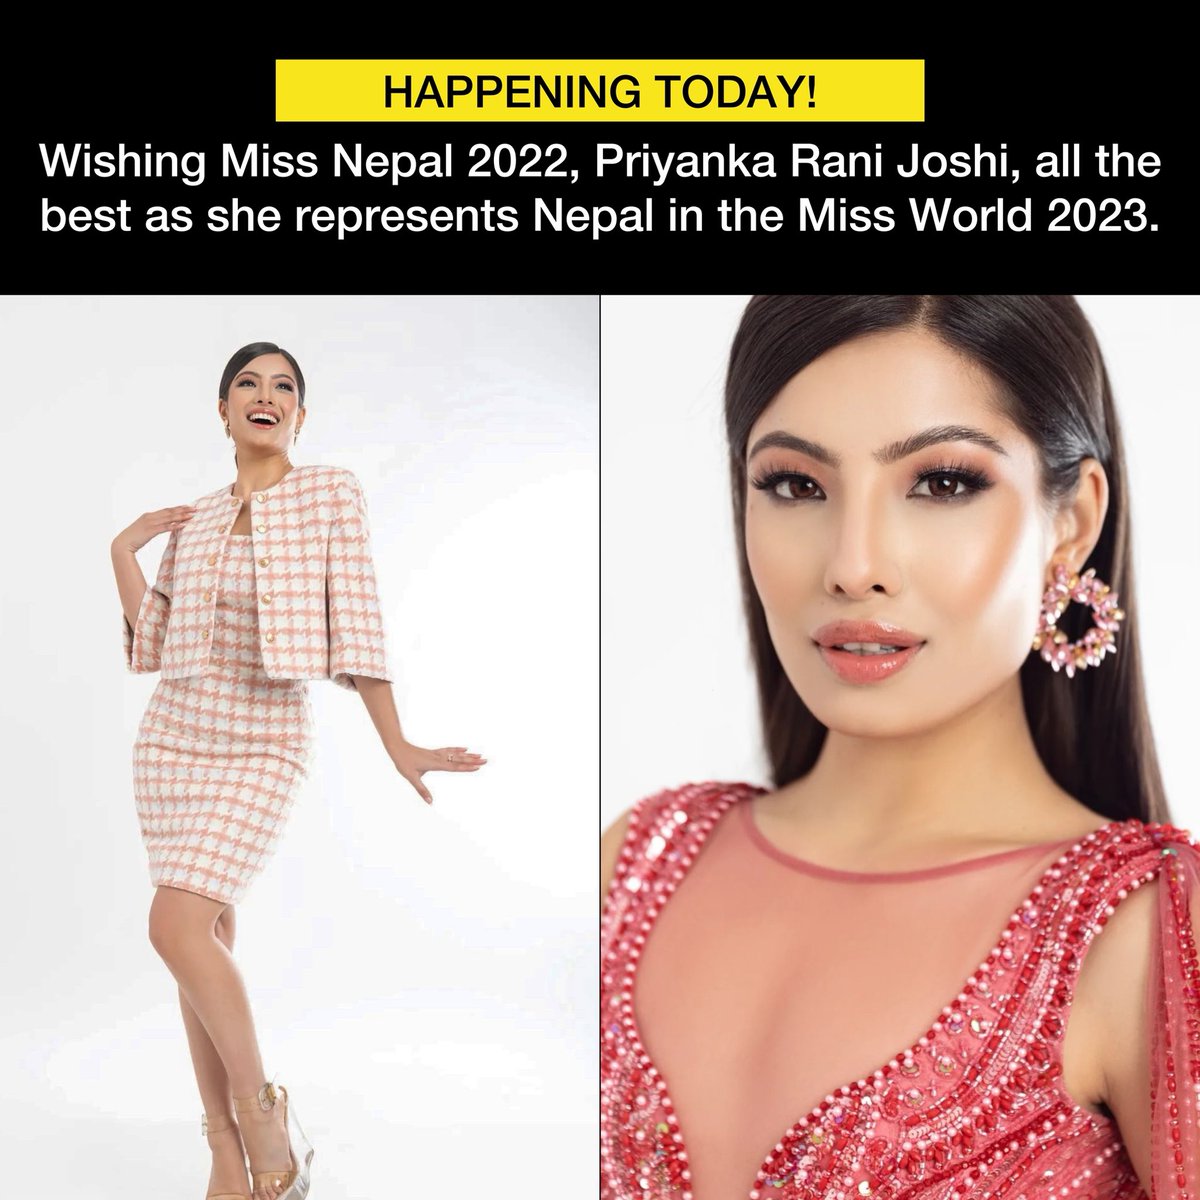 MISS WORKD GRAND FINALE: Wishing Miss Nepal 2022, Priyanka Rani Joshi, all the best as she is representing Nepal in the 71st Miss World 2023.

Joshi is already one of the winners of BWAP and has made it to the Top 40.

All the best. विजयी भवः 
#missworld #missnepal #beautypageant